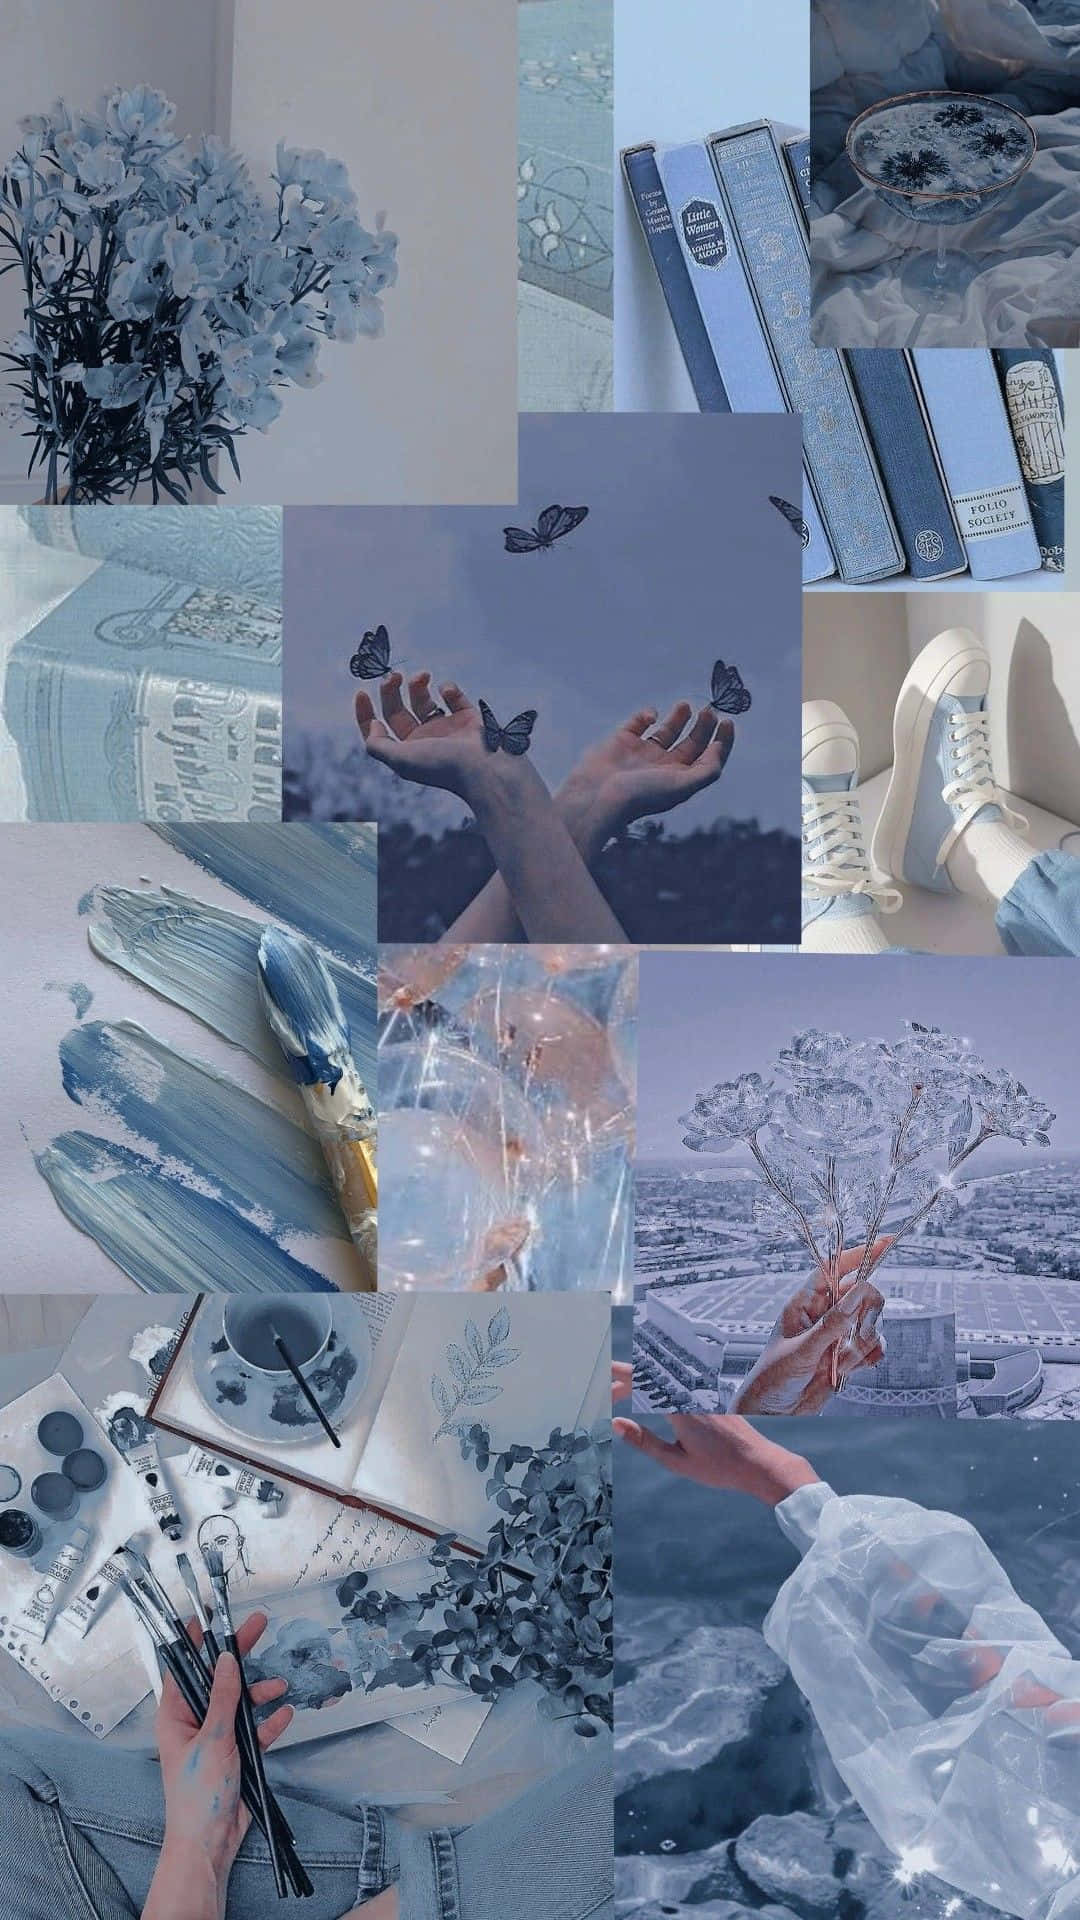 Glaucous Aesthetic Collage Wallpaper